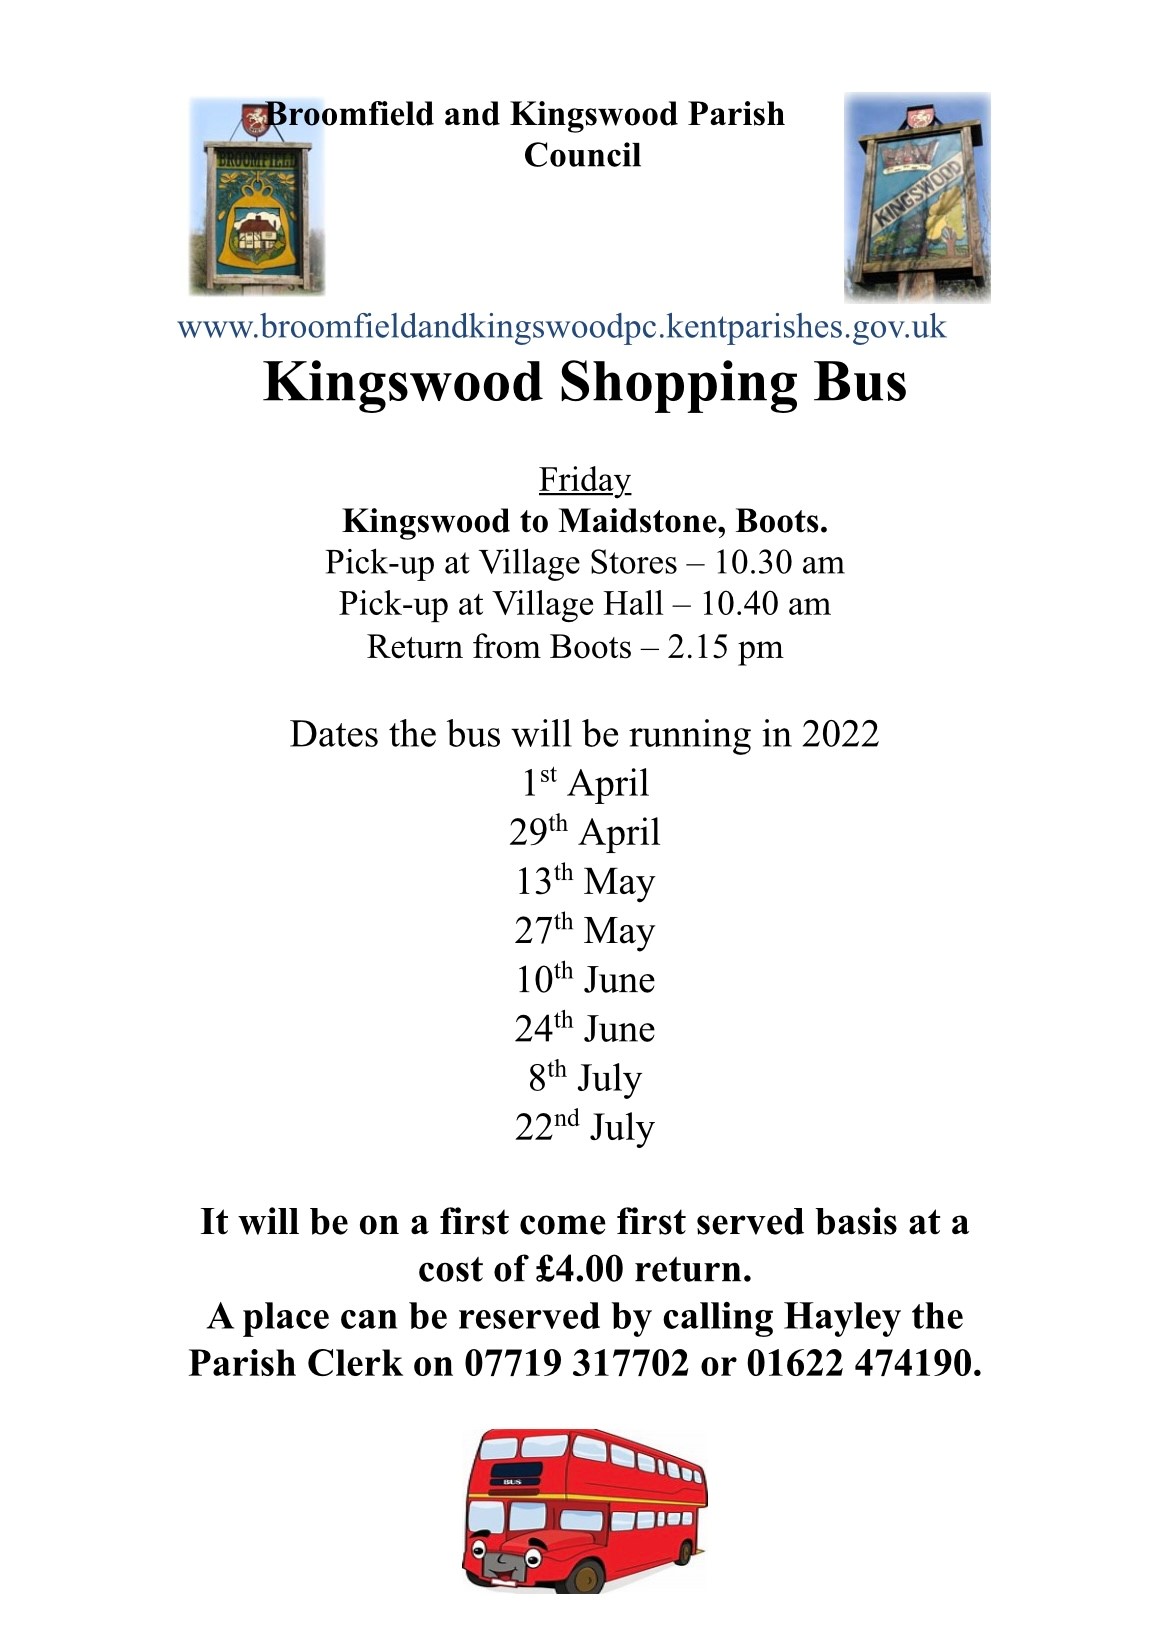 Broomfield & Kingswood Parish Council Shopping Bus Service